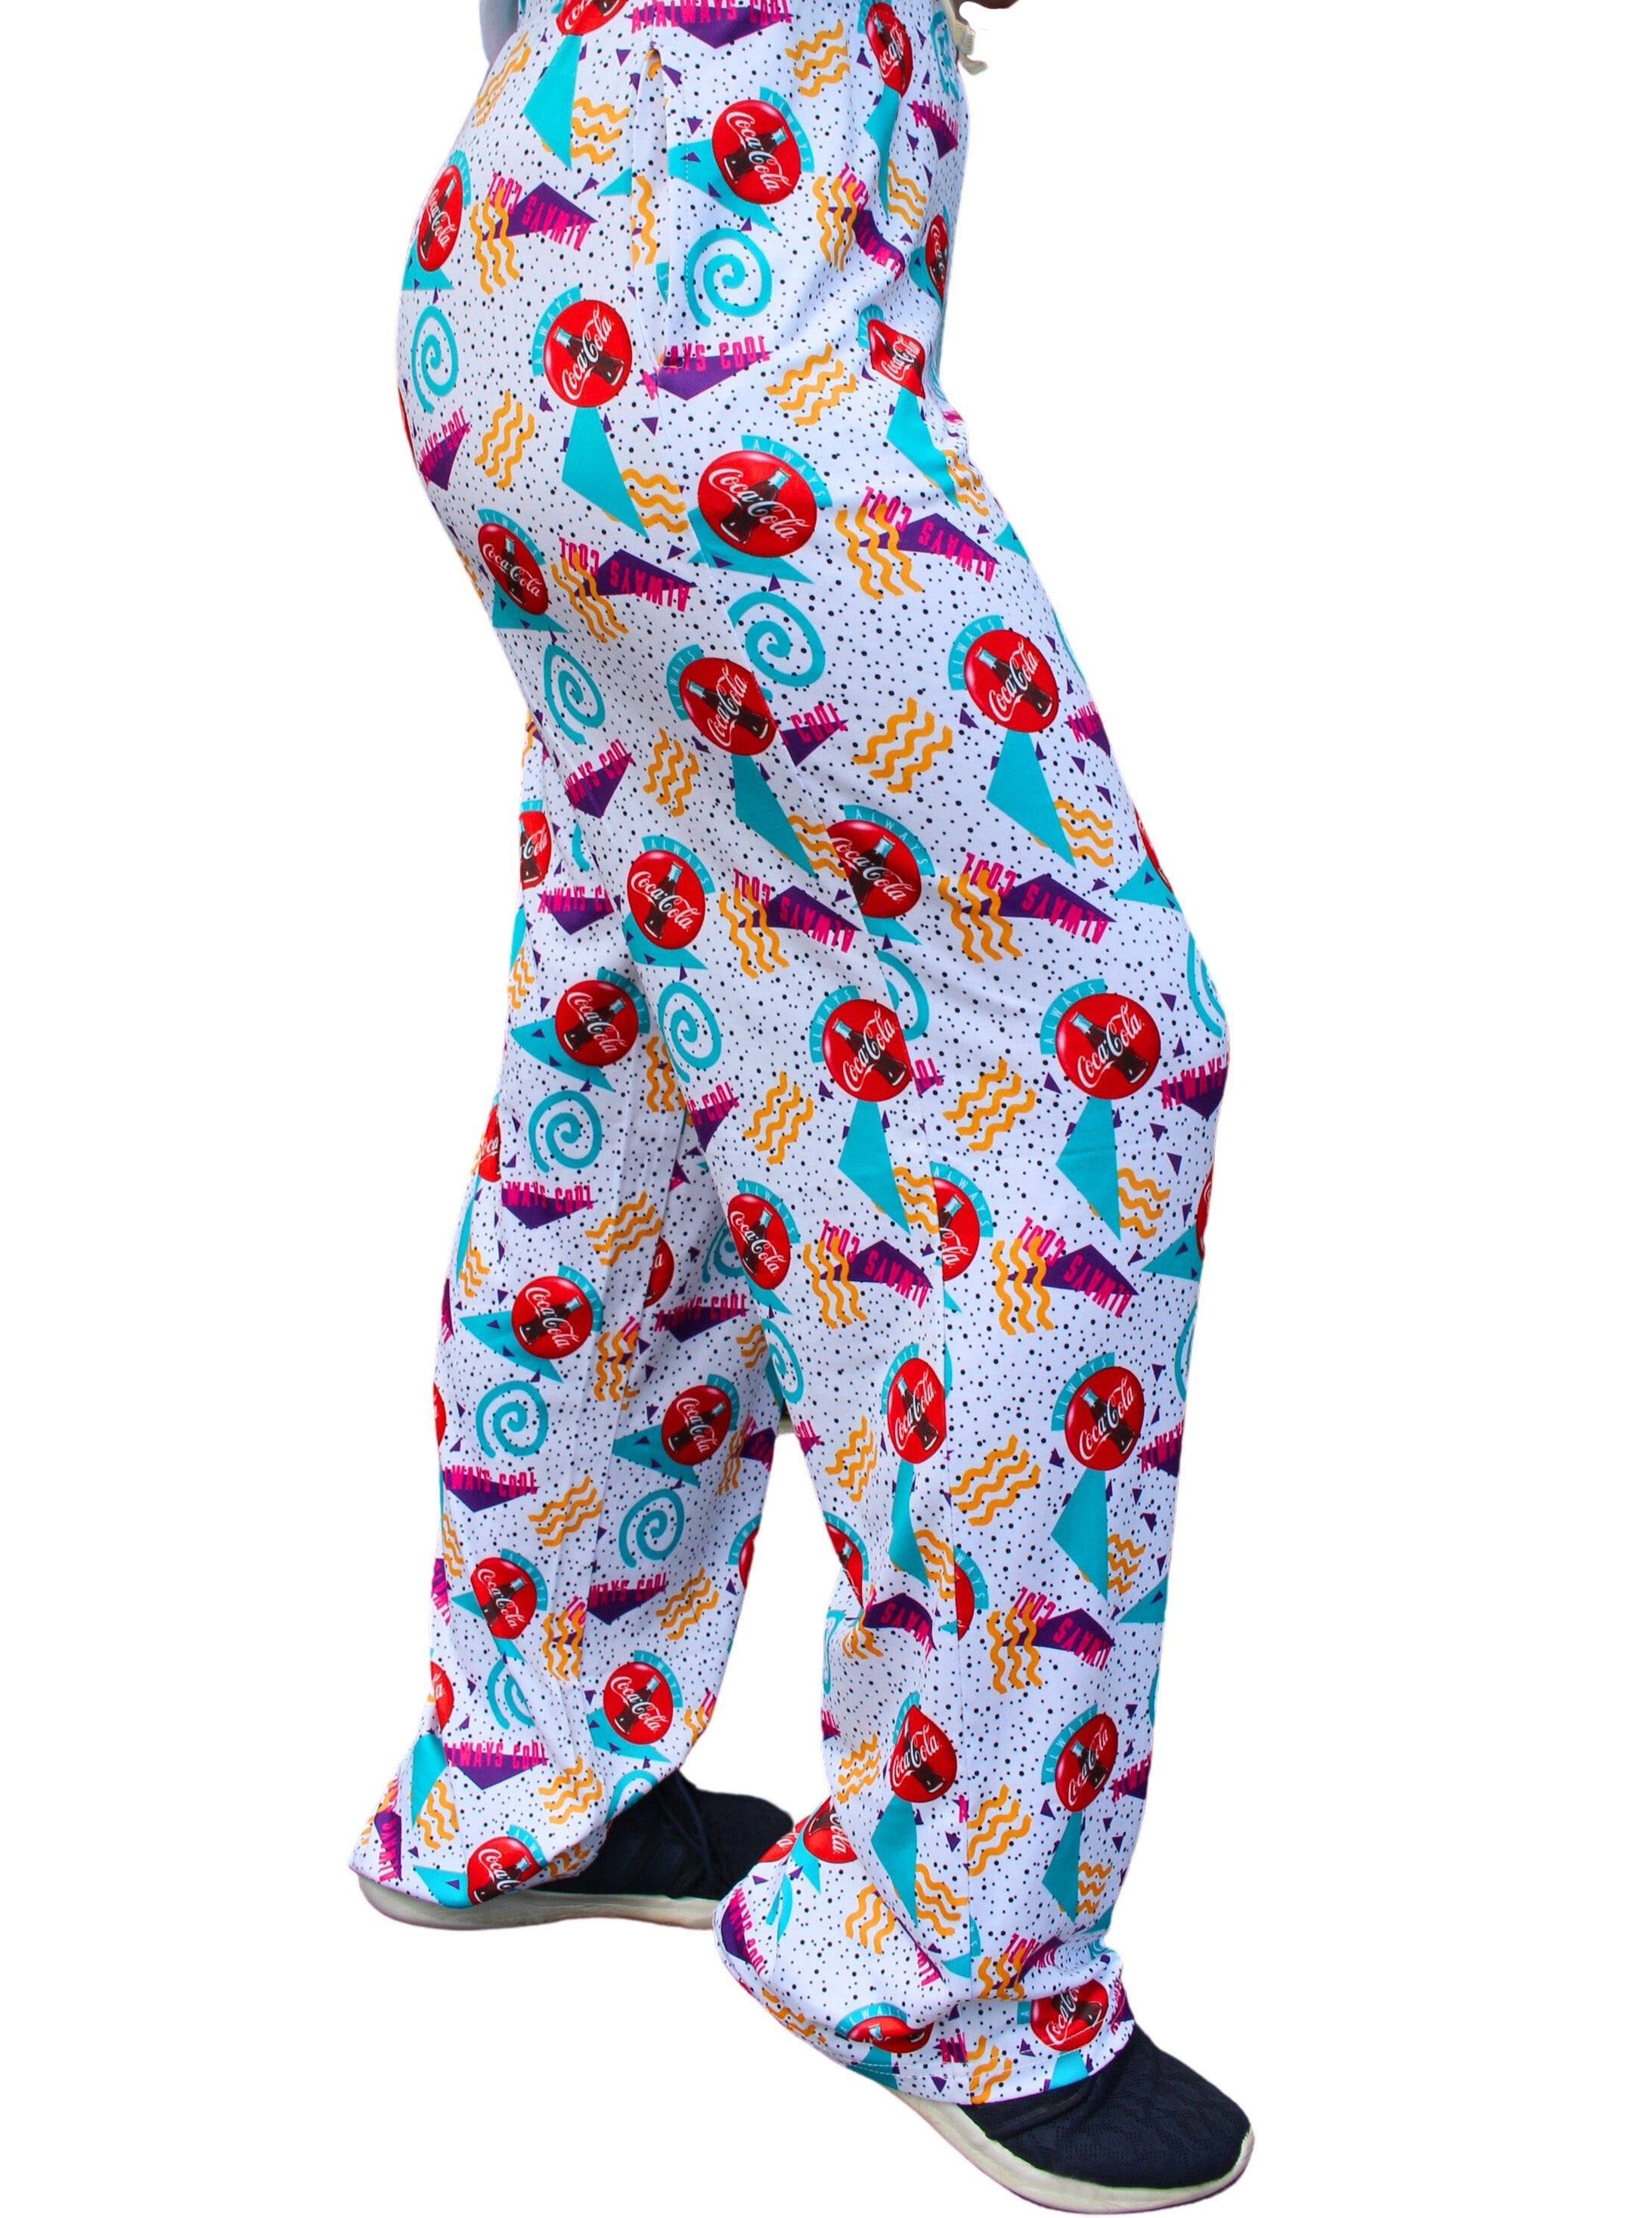 BRIEF INSANITY Coca-Cola 90's Pajama Lounge Pants right side view